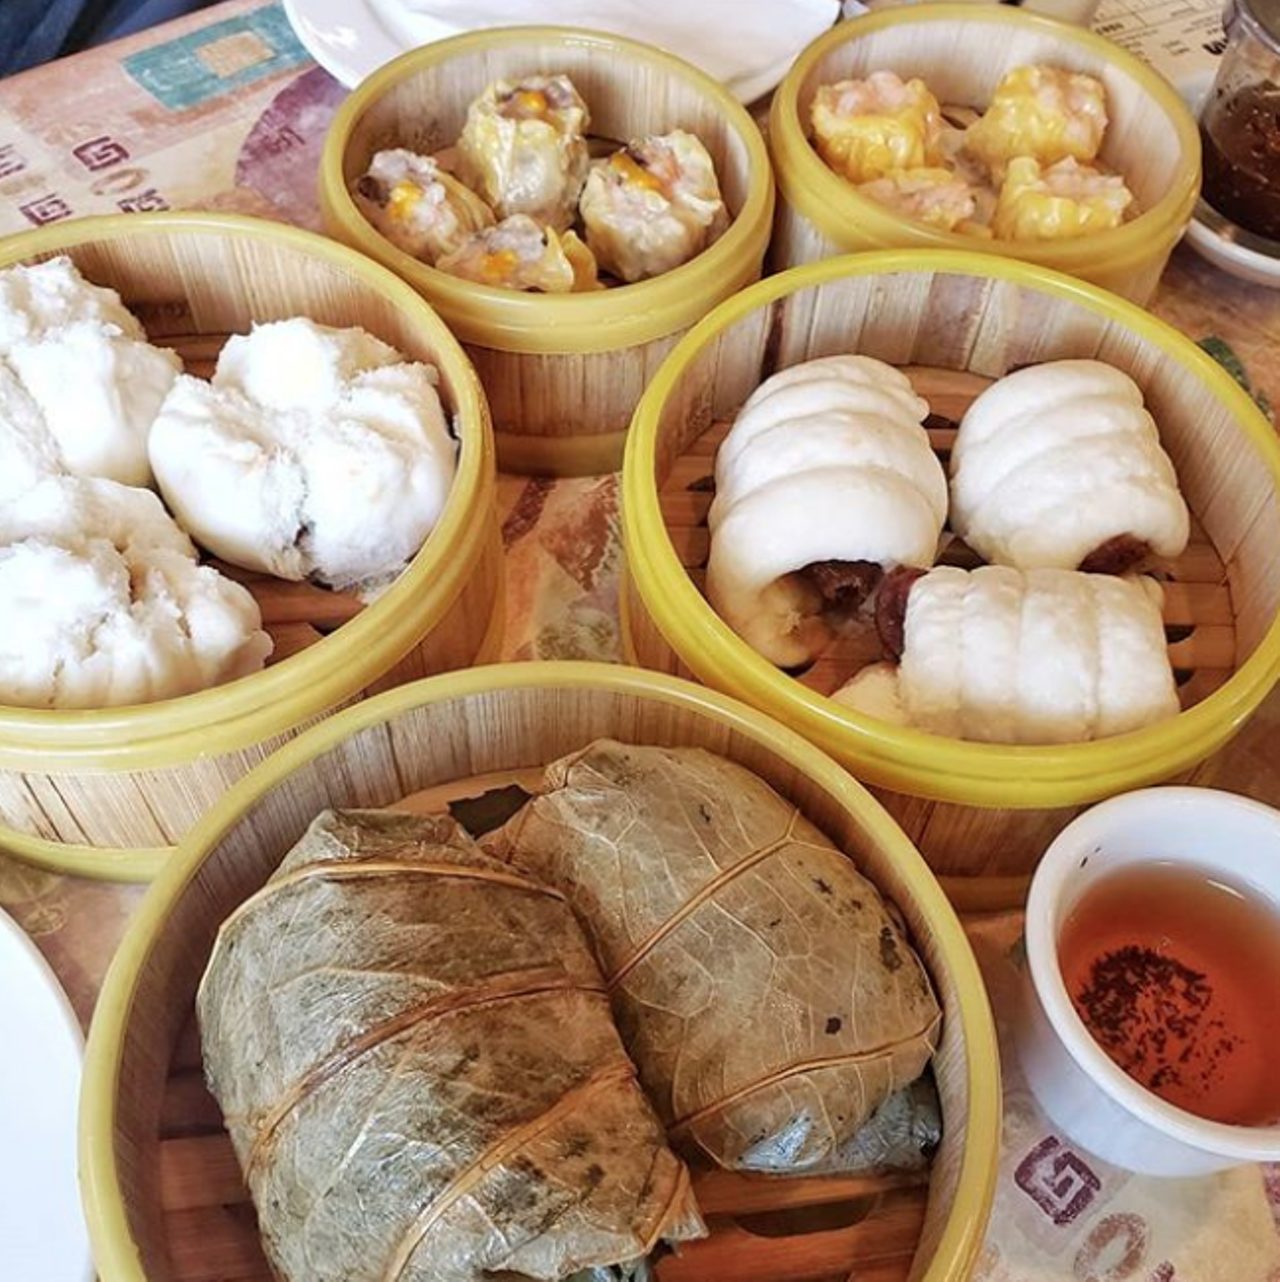 Dim Sum Oriental Cuisine
2313 NW Military Hwy Ste 125, (210) 340-0690
Formerly home to a Beijing Chinese Cuisine, this new restaurant offers San Antonians another option for dim sum, which is relatively rare considering how many Chinese restaurants there are. The Asian spot opened in late July.
Photo via Instagram / s.a.vory